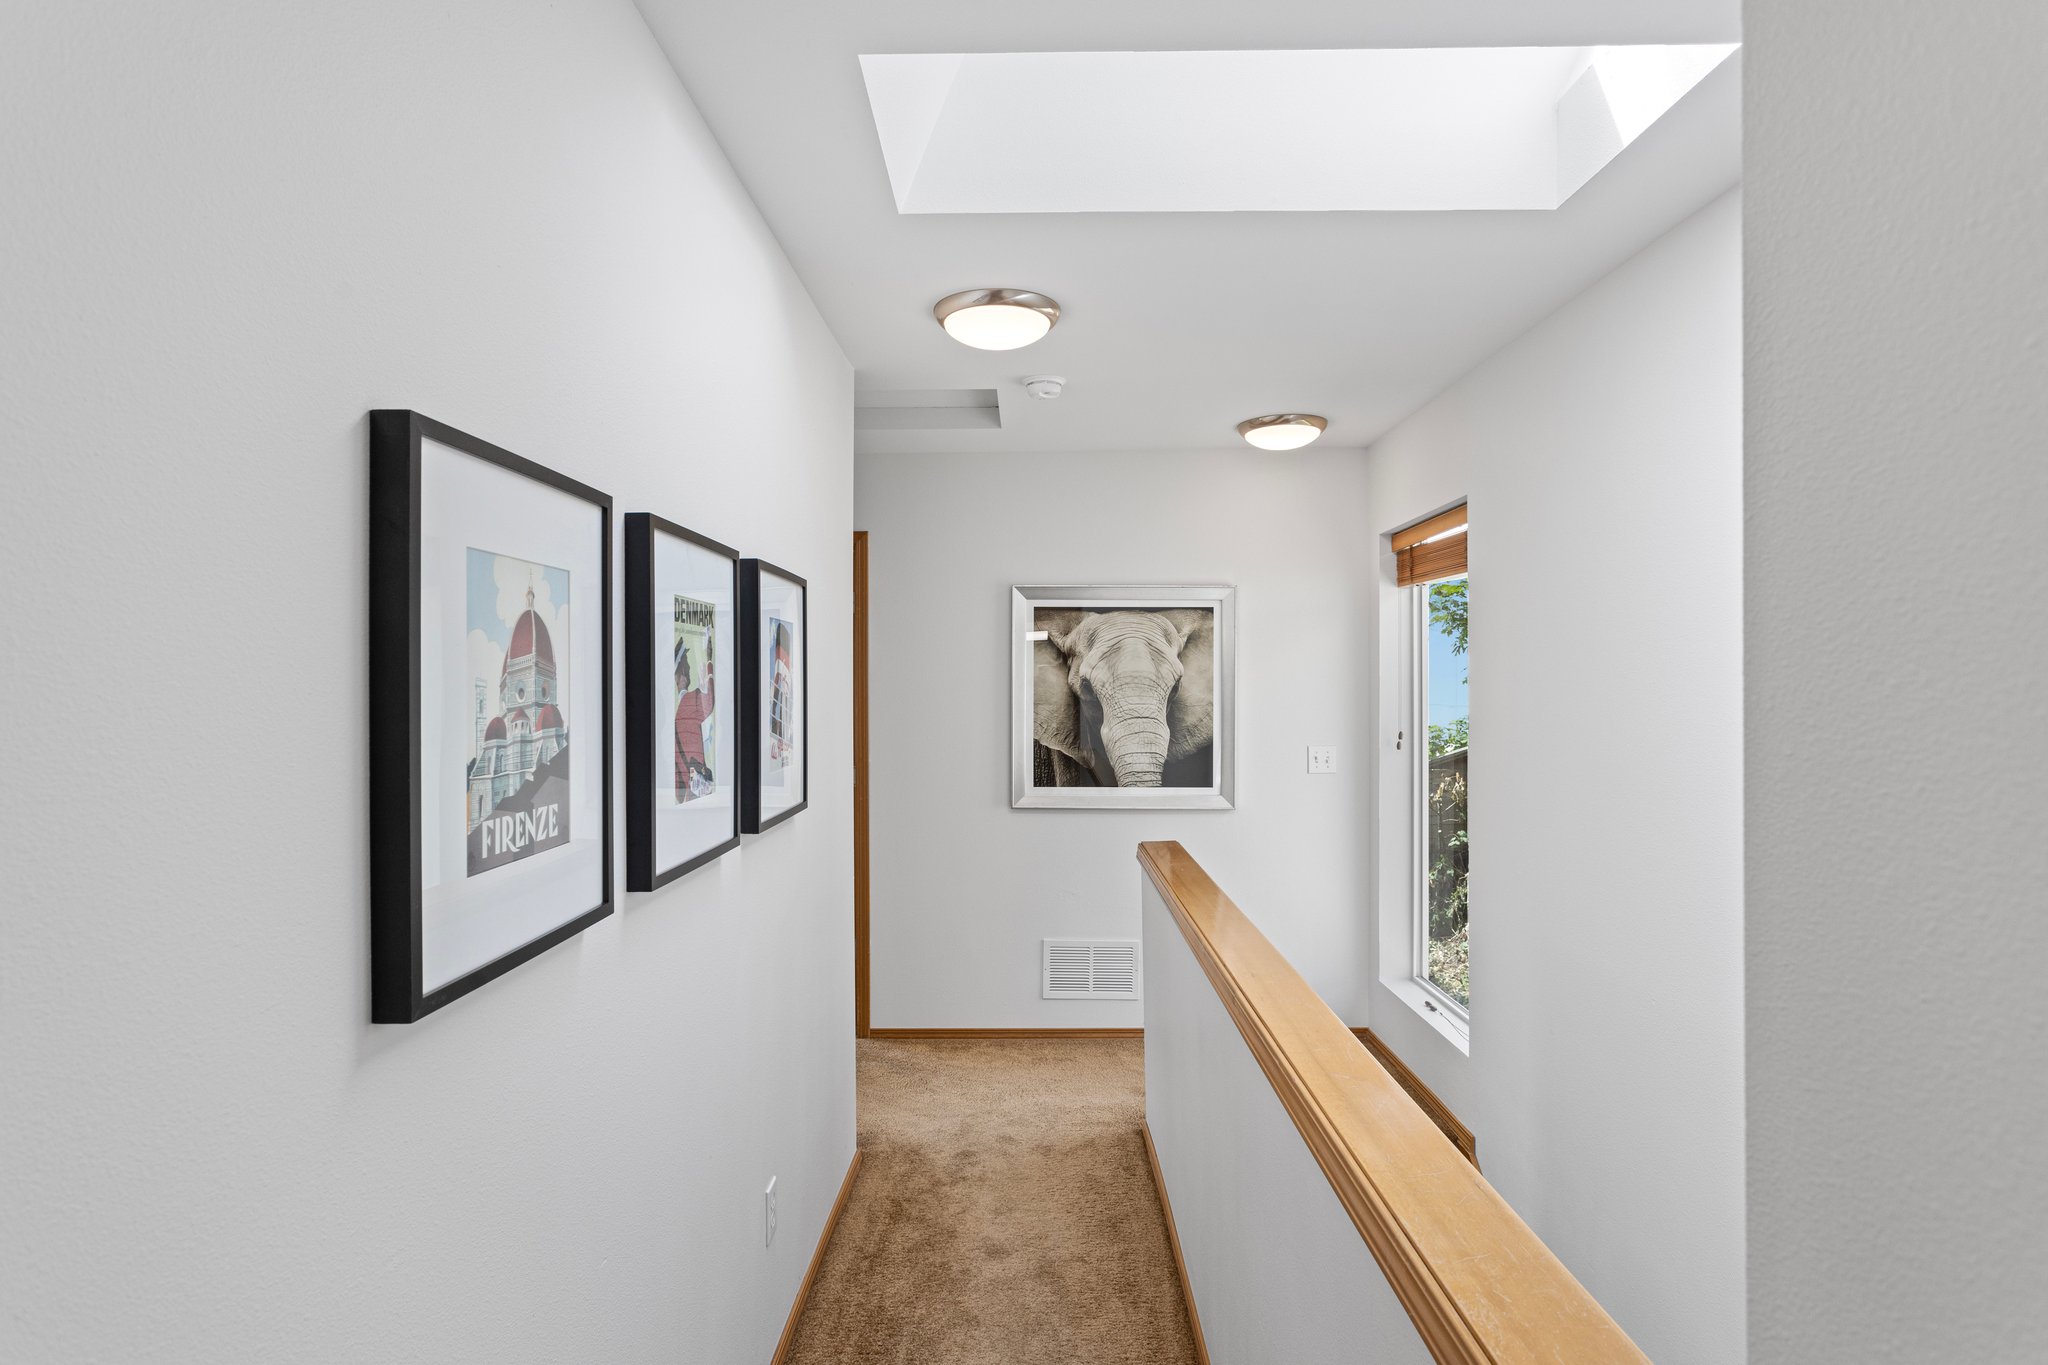 Upstairs, this sky-lit hallway with a large landing window will make you feel like you’re living in a cloud, flooding the space with natural light, and enhancing the spacious uplifting vibe of the bedroom floor.